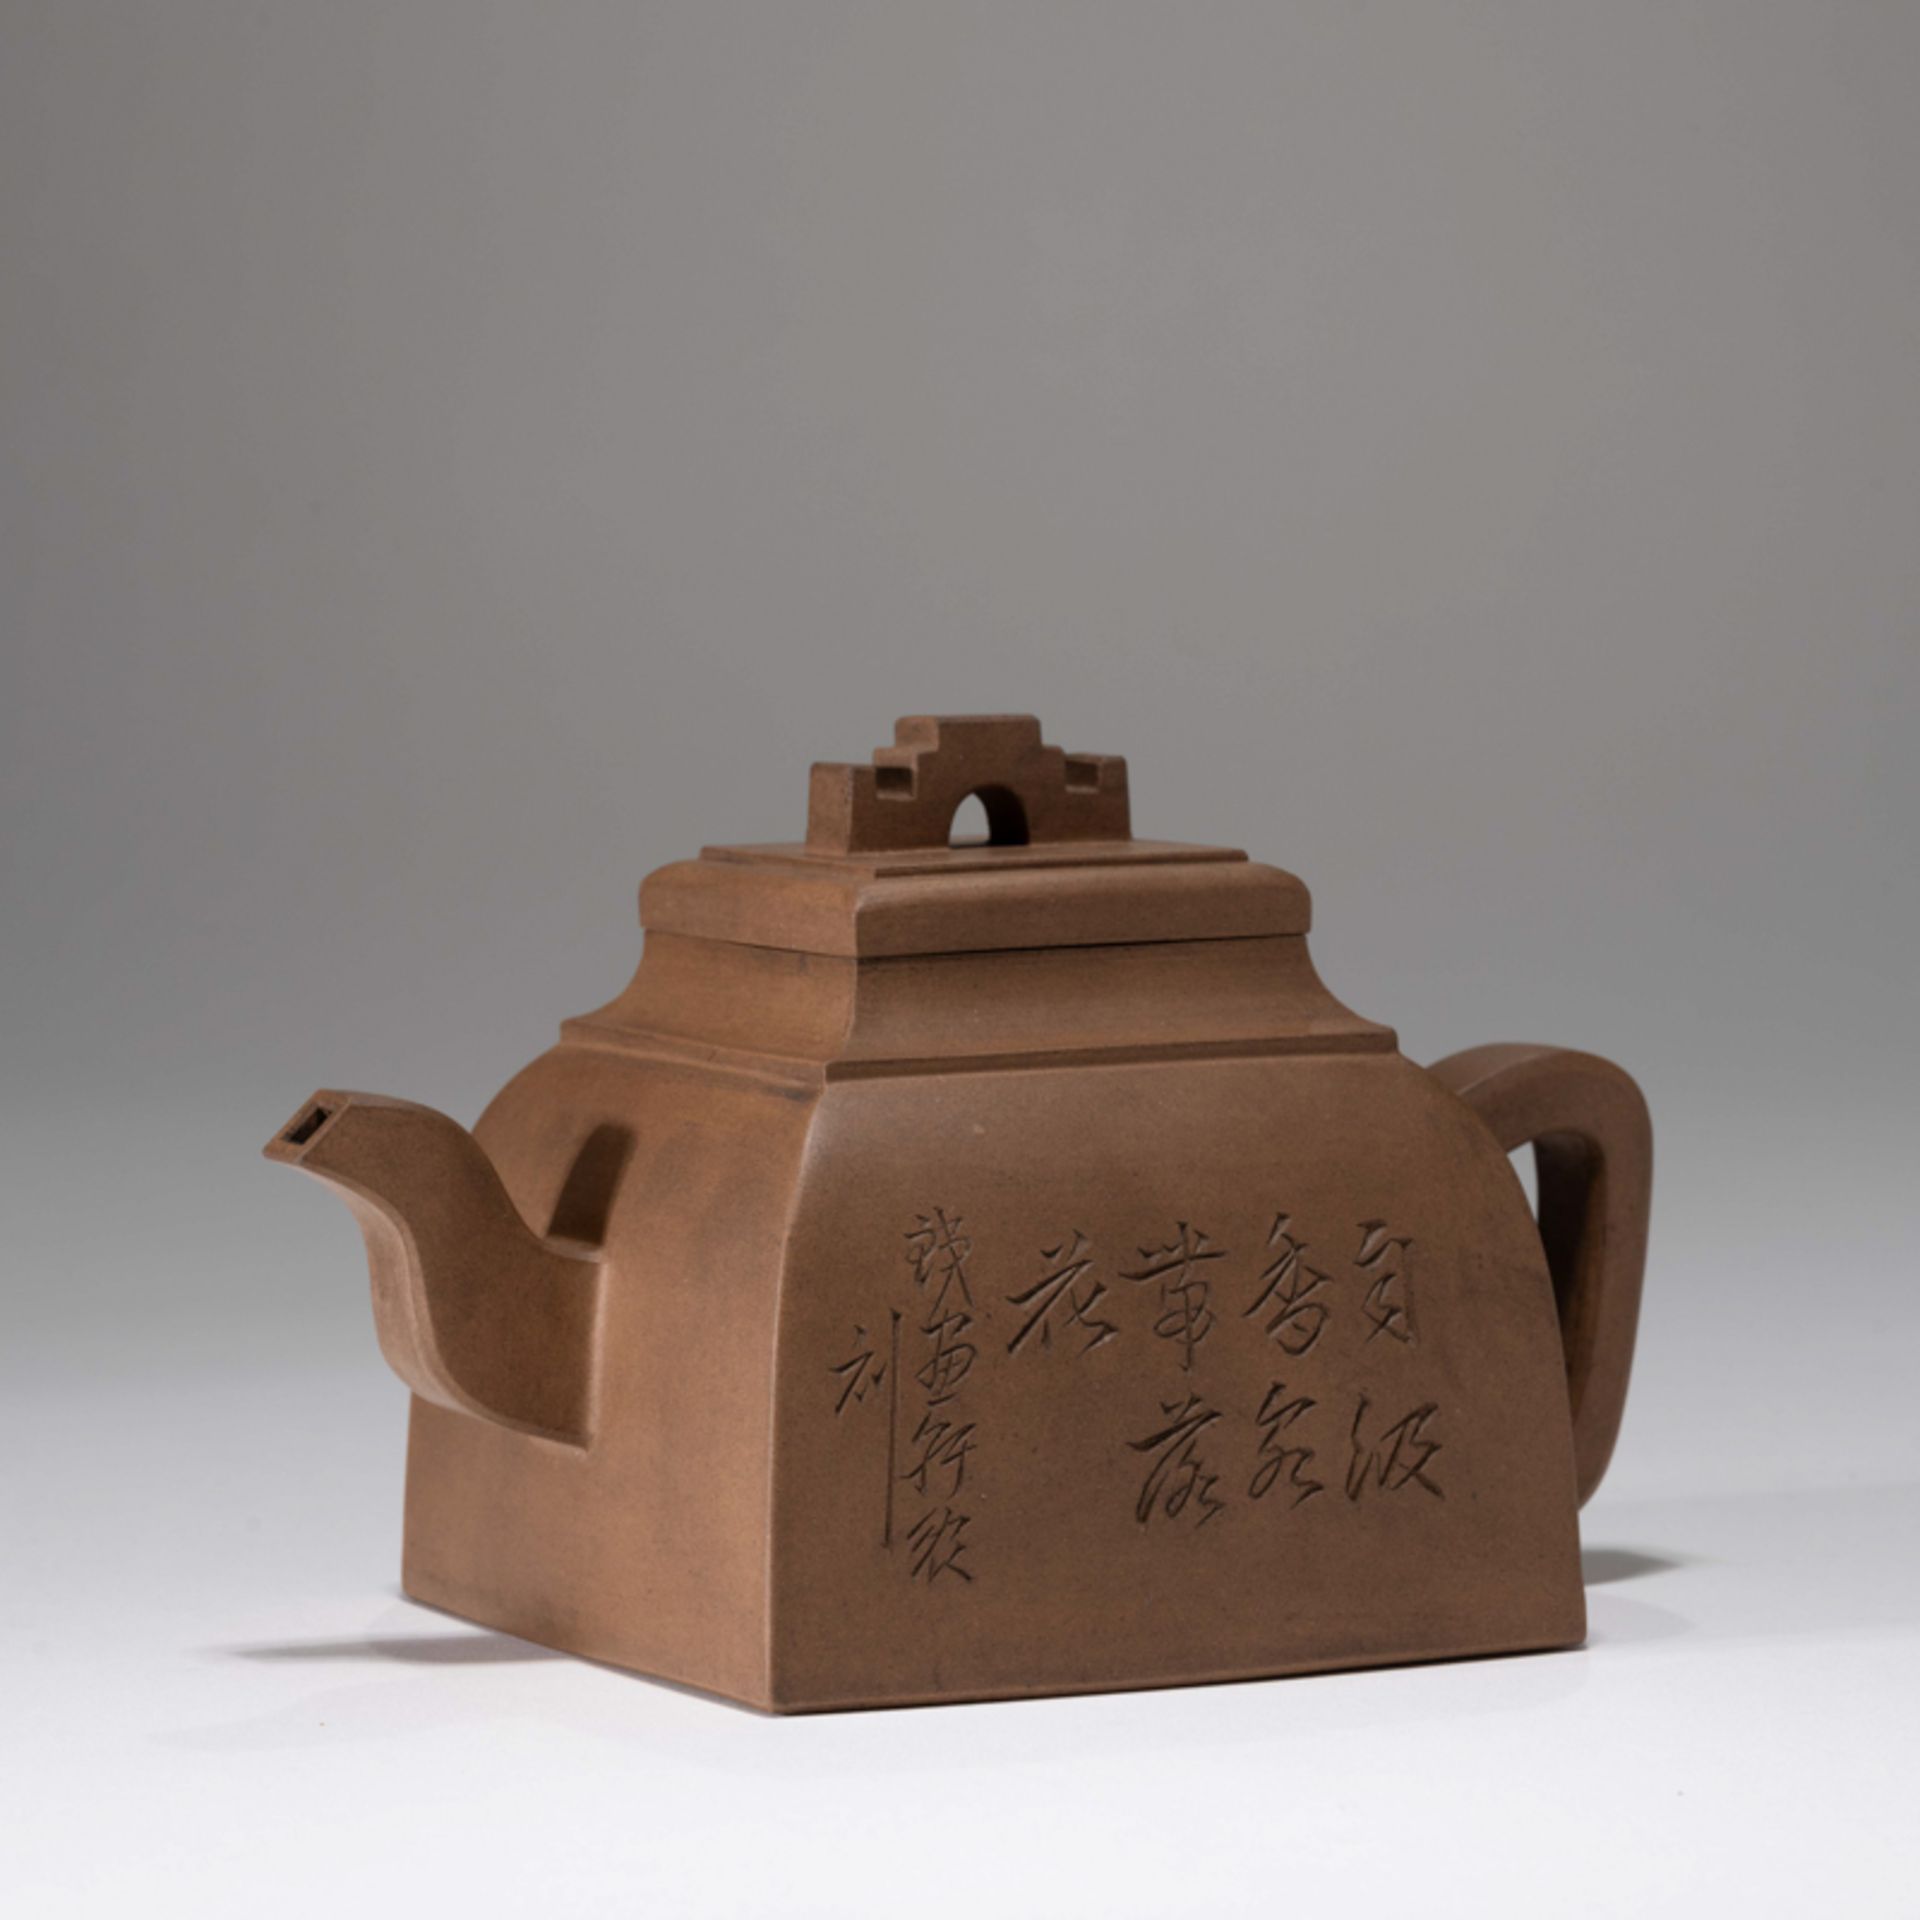 A CHINESE ZISHA 'LANDSCAPE' SQUARE POT, WITH '雲根 (YUN GEN), 鐵畫軒 (TIE HUA XUAN)' MARKS